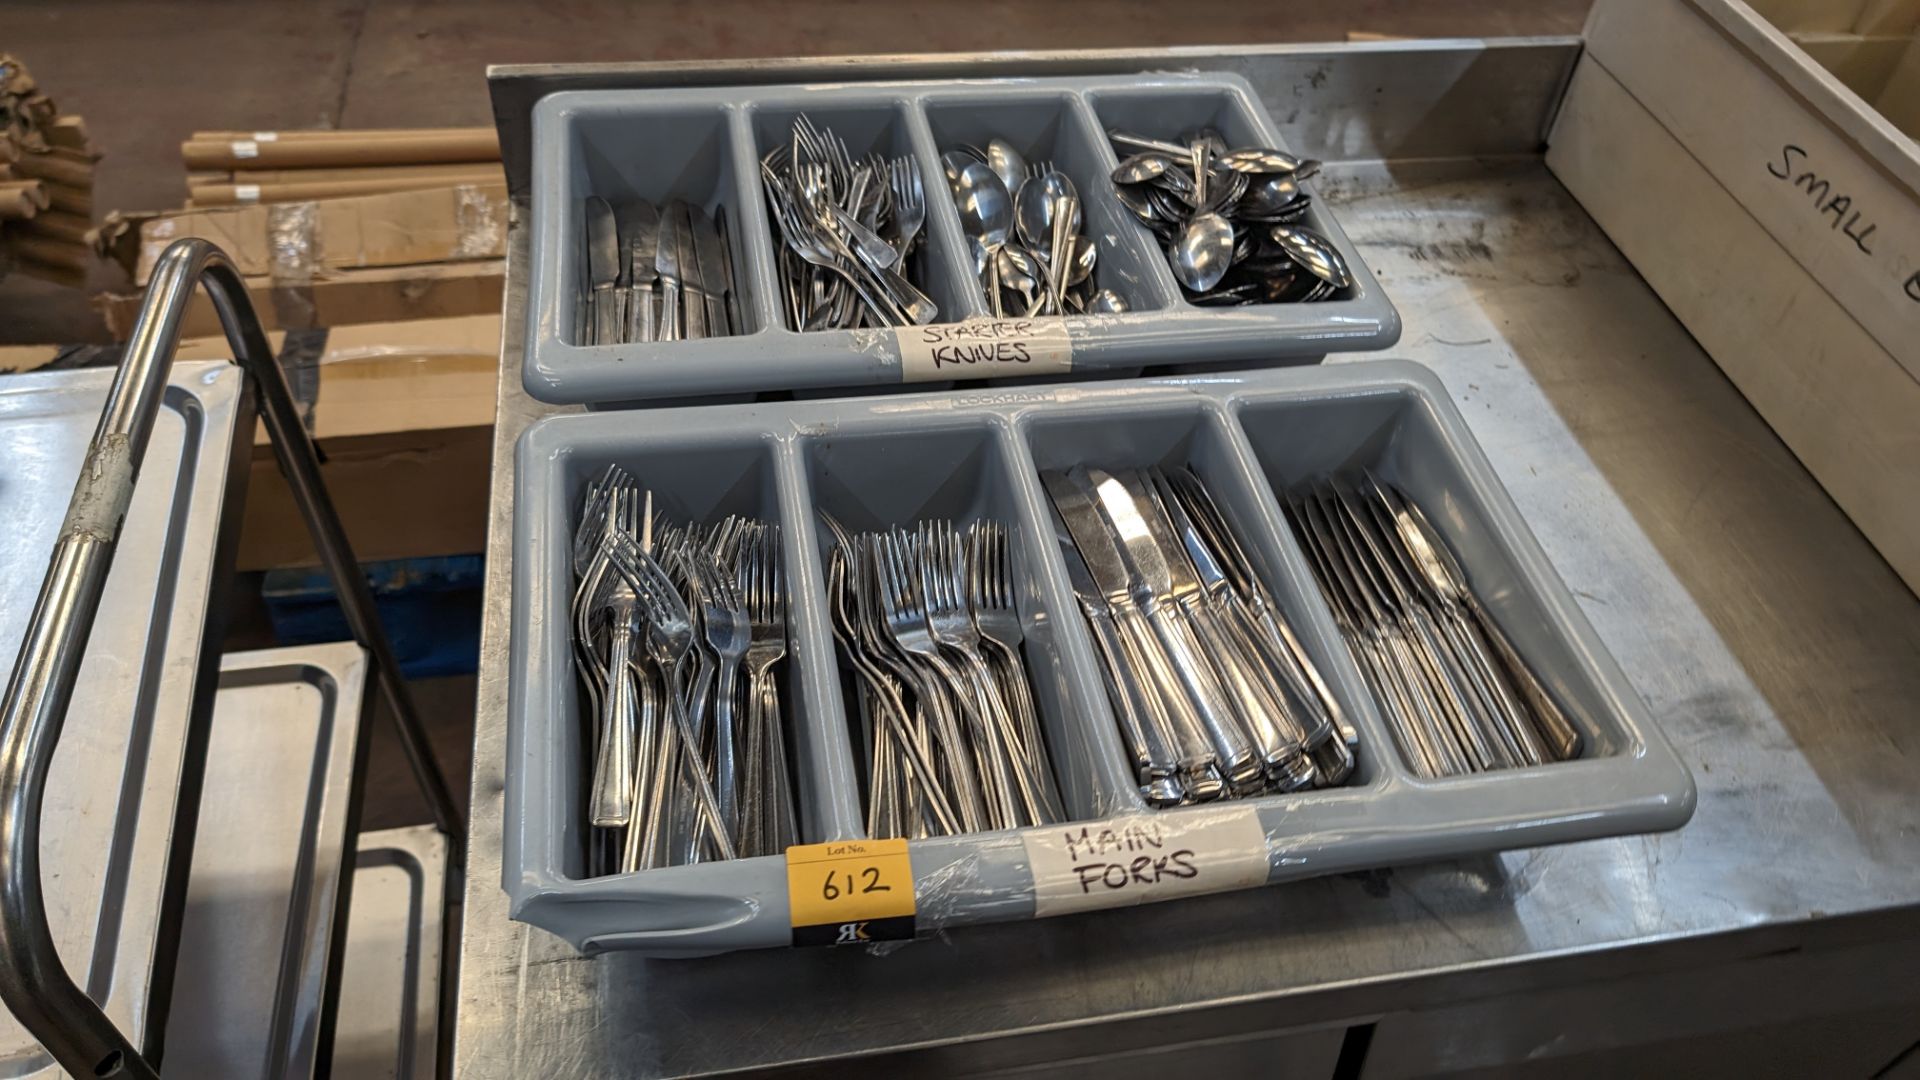 2 trays of cutlery and their contents